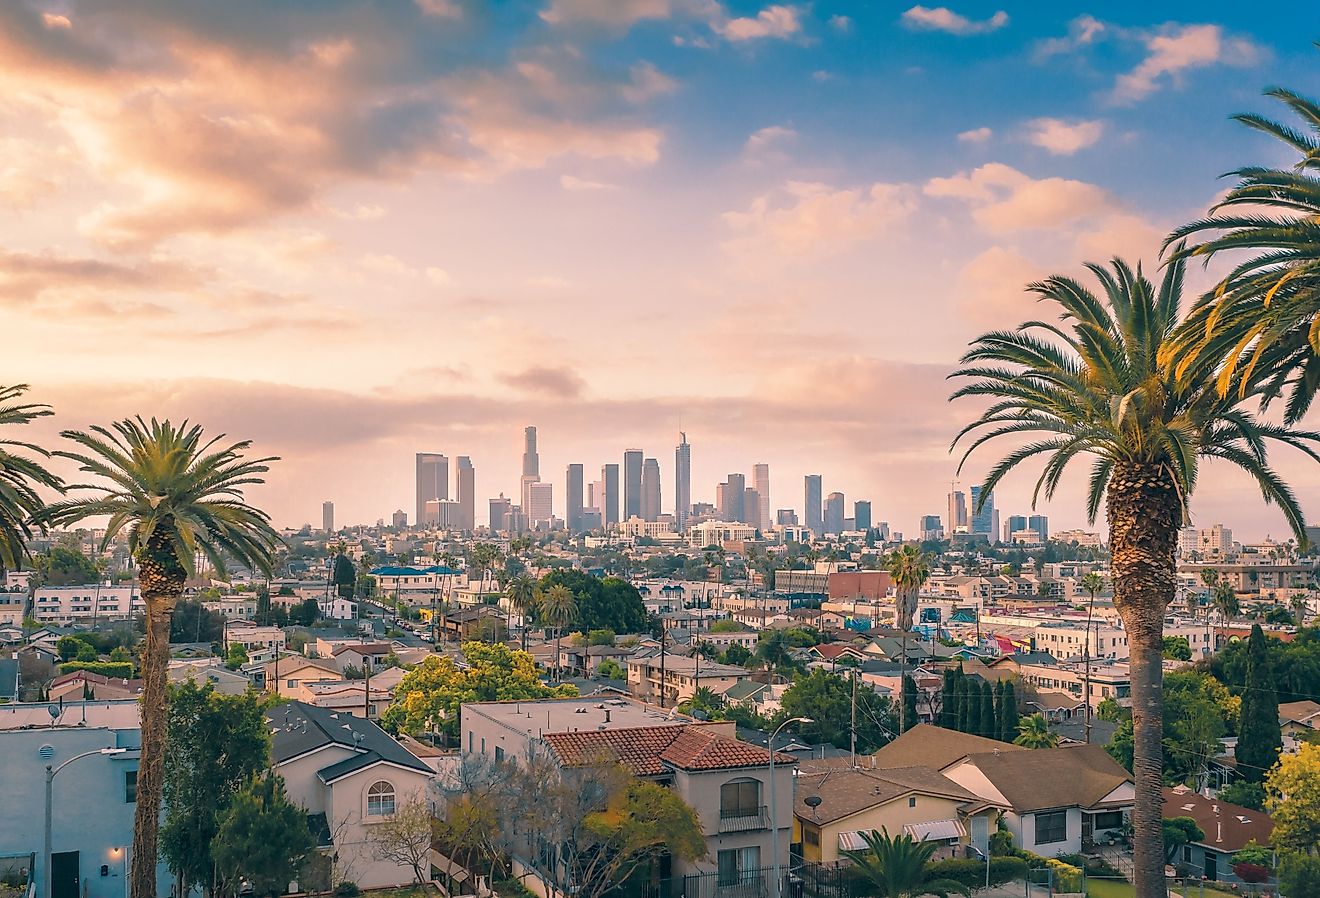 Beautiful sunset of Los Angeles downtown skyline and palm trees.